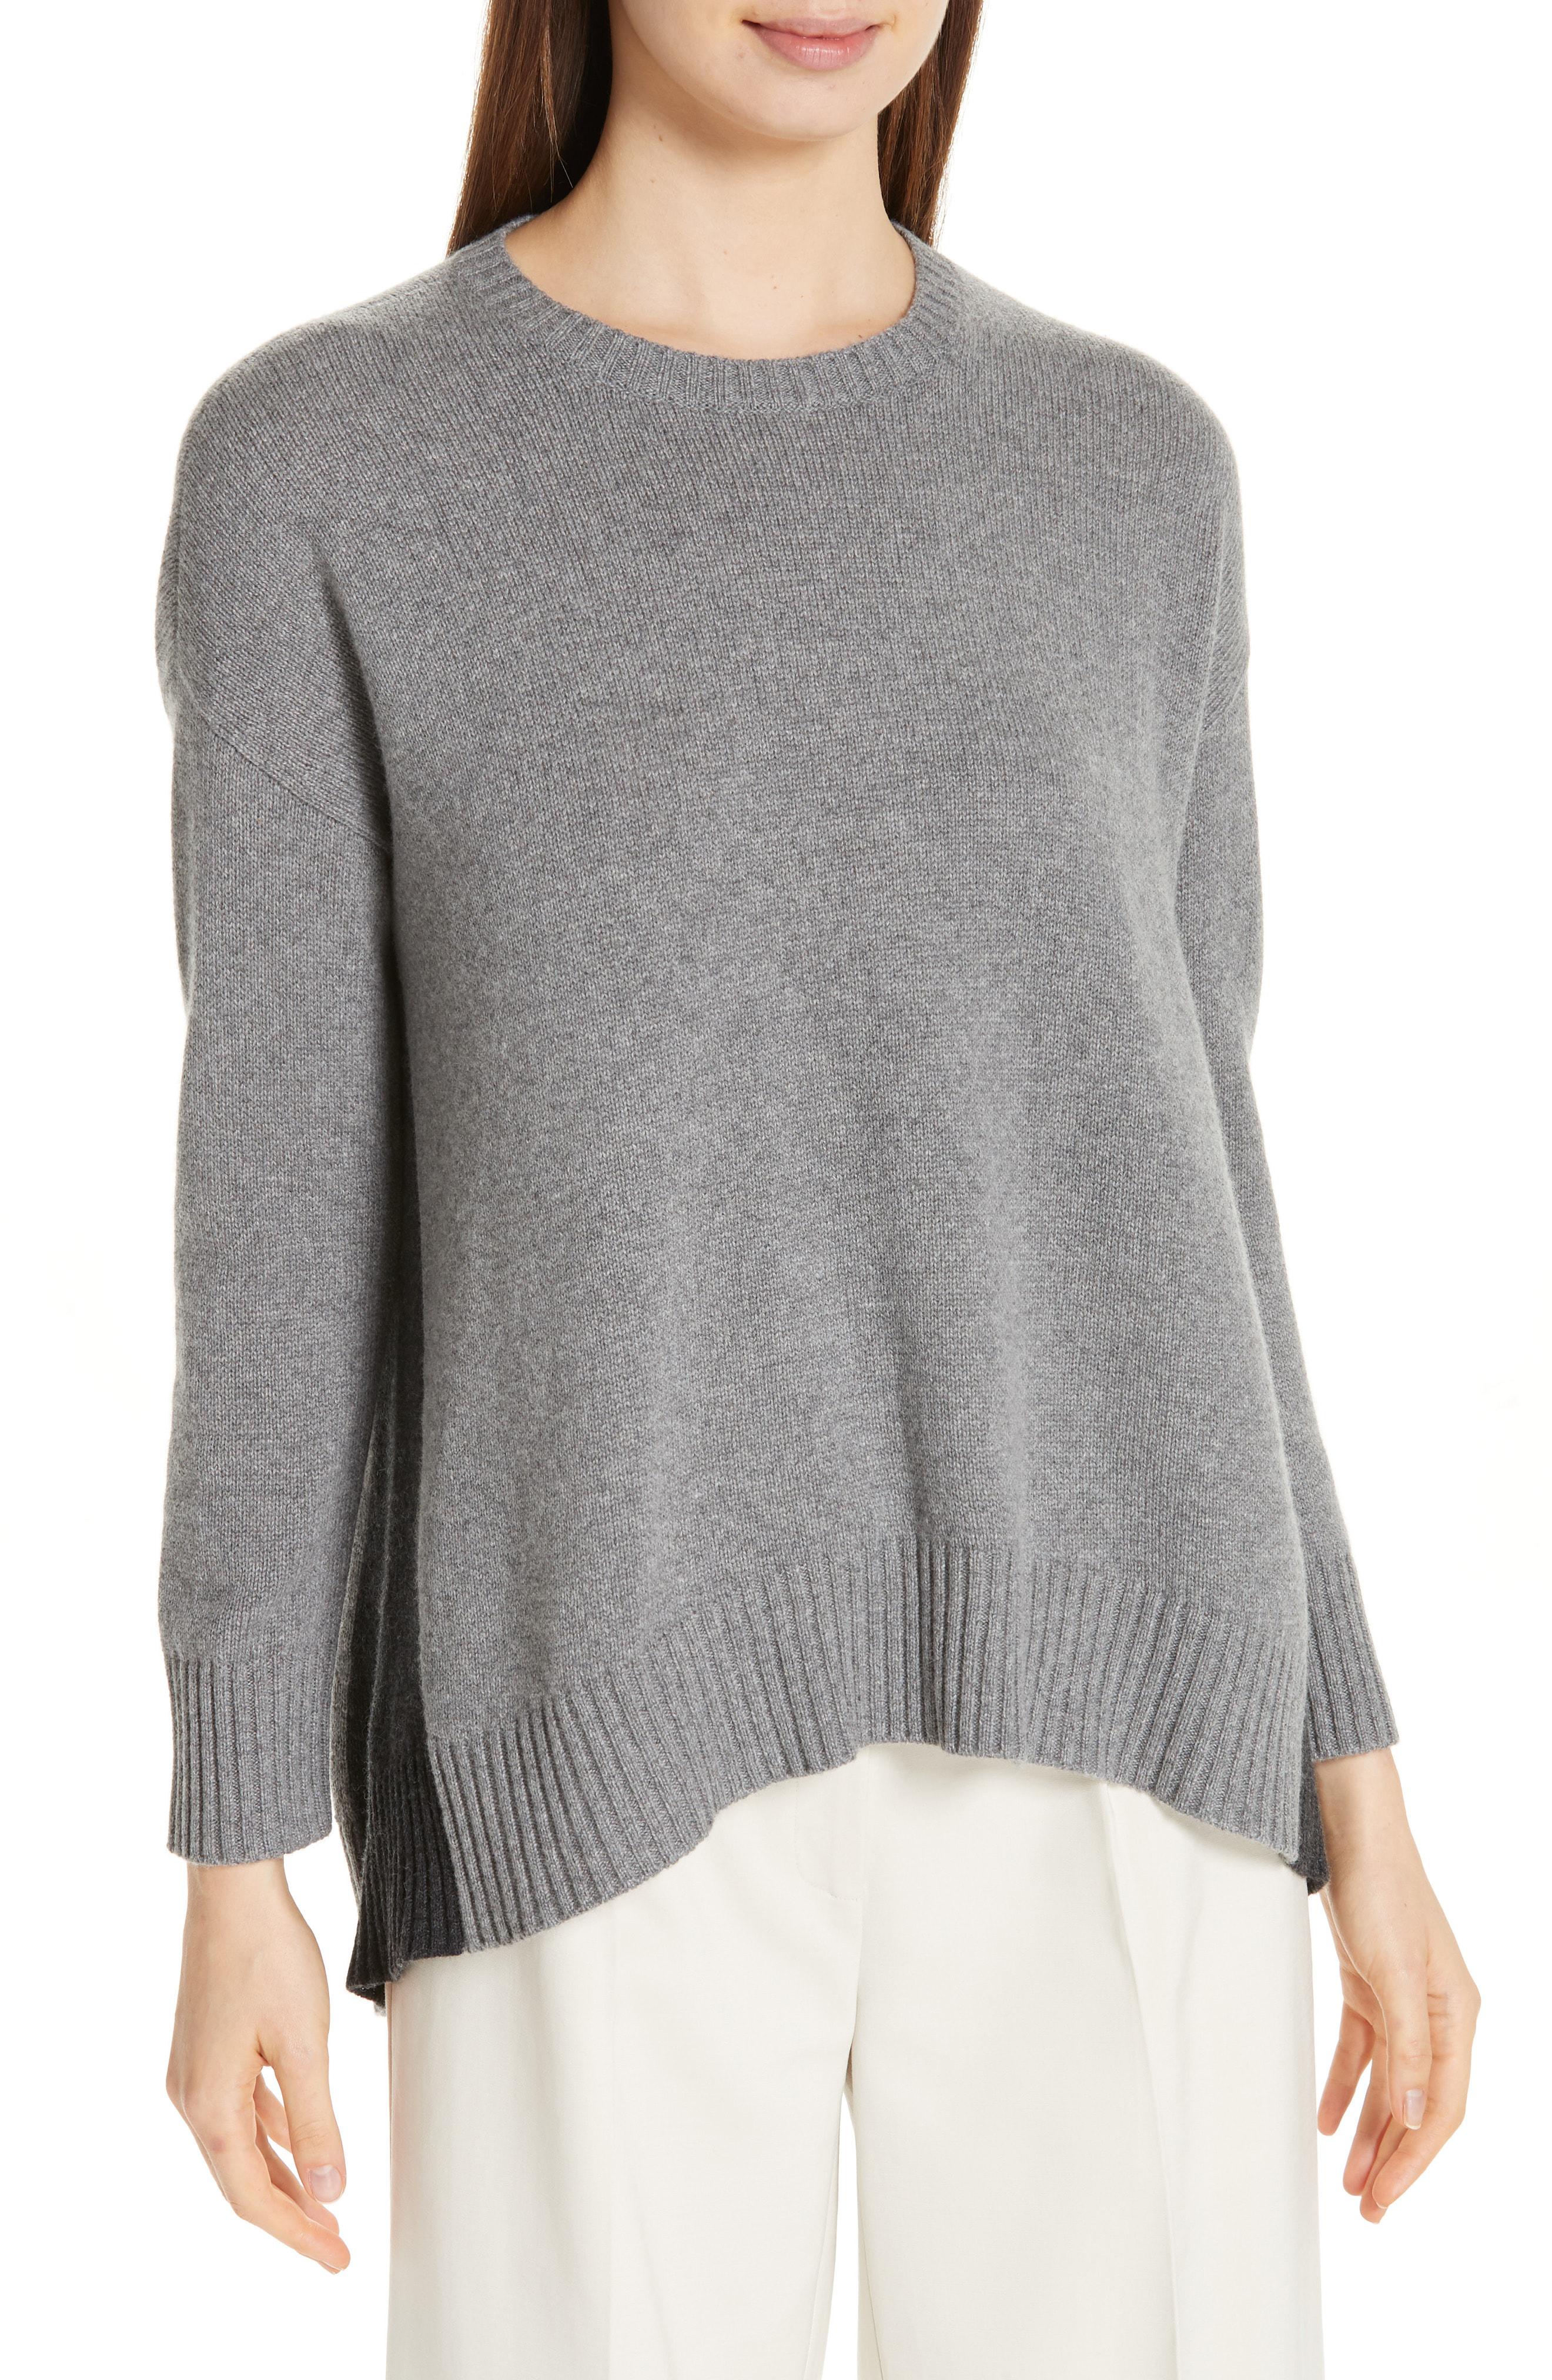 Eileen Fisher Oversize Cashmere & Wool Sweater in Gray - Lyst